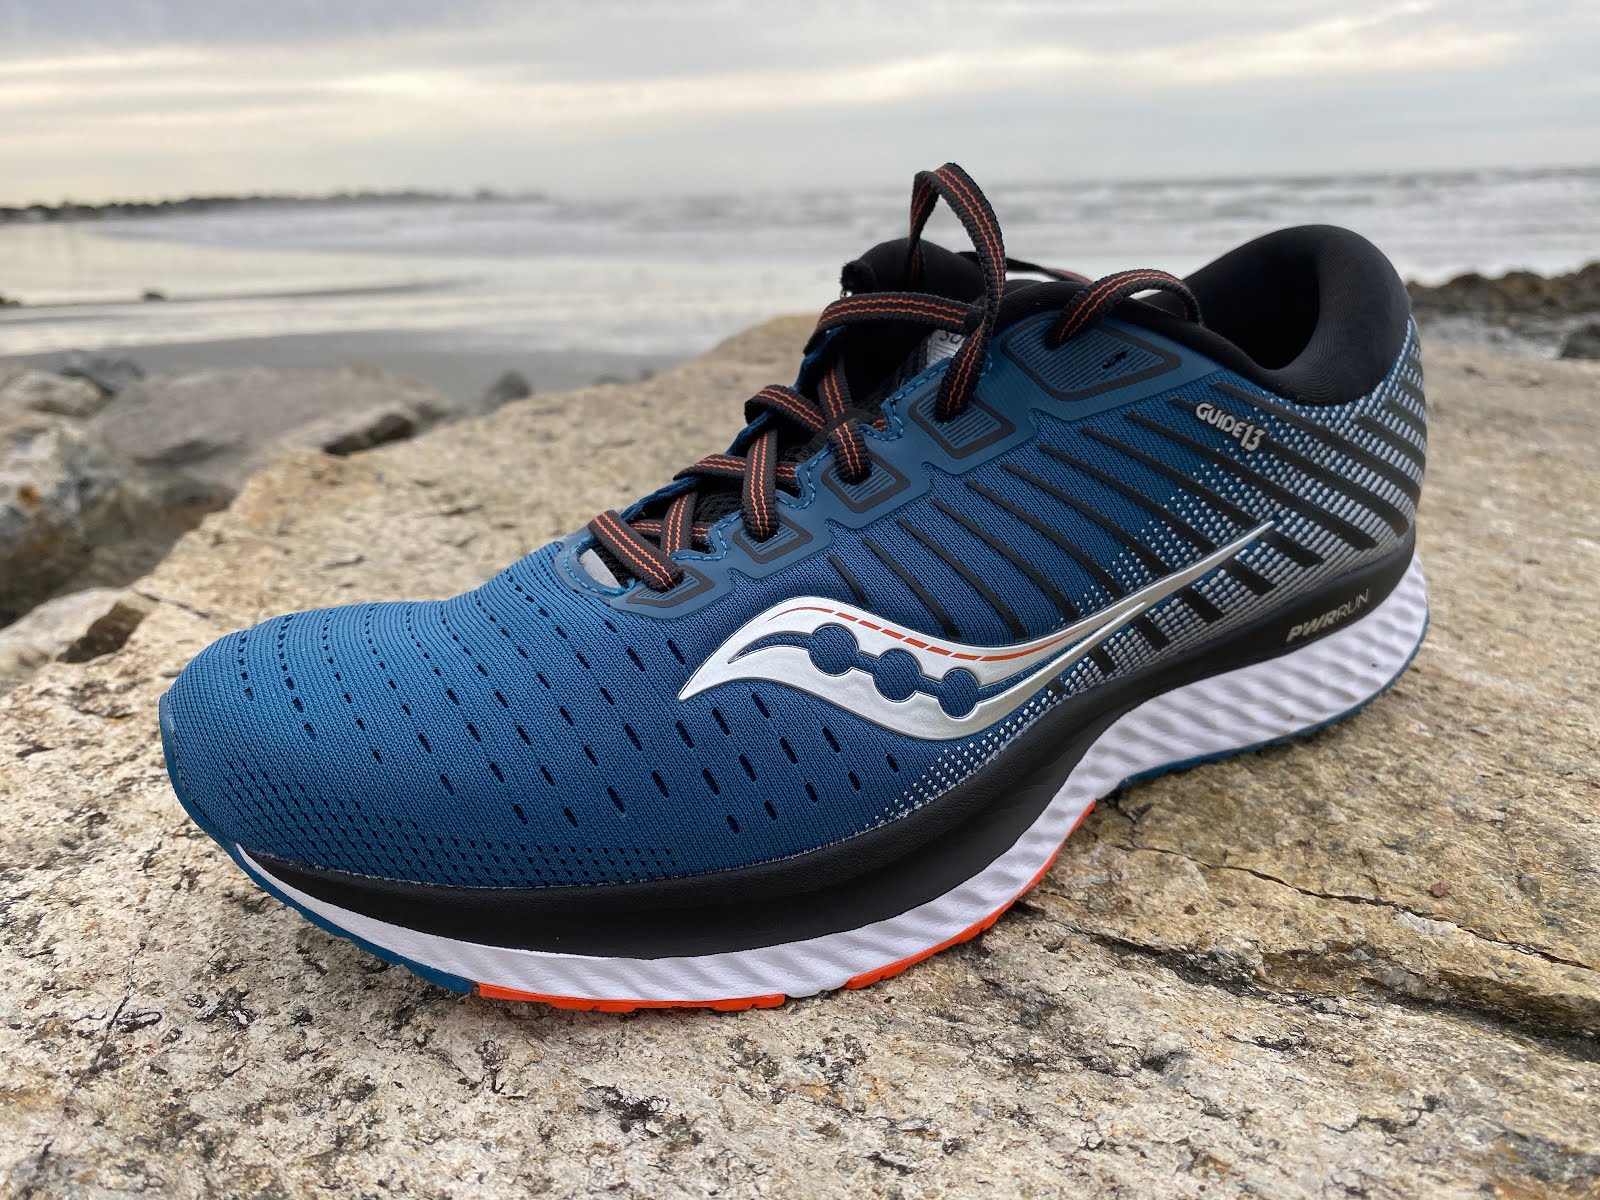 Road Trail Run: Saucony Guide 13 Initial Run Review Video and Shoe Details